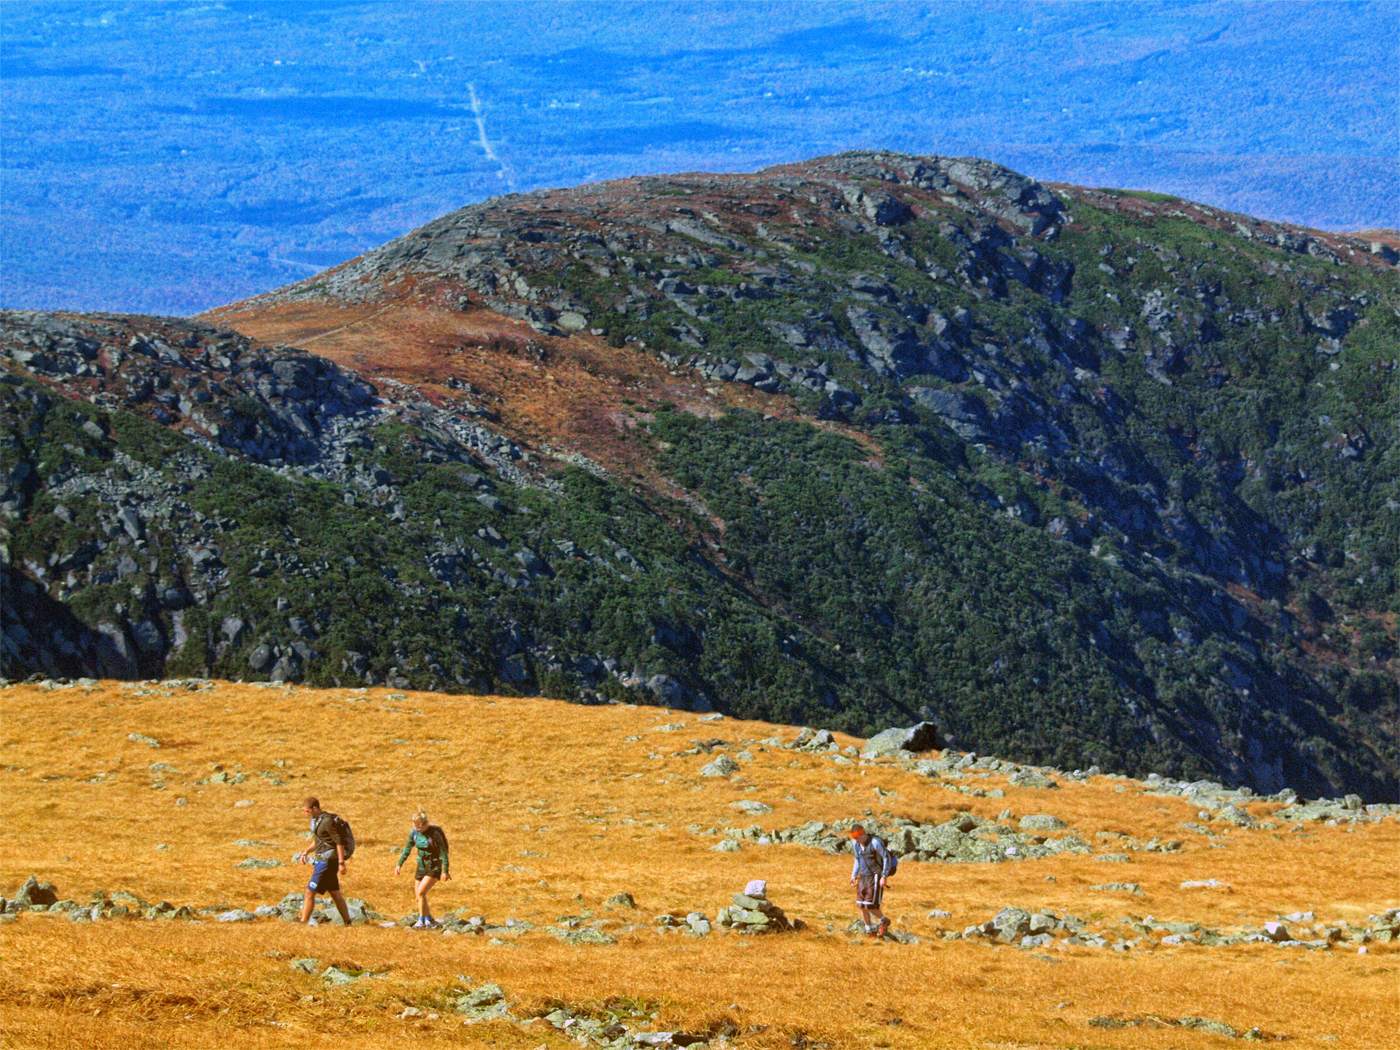 Visitors from around the world are expected to land in New Hampshire's White Mountains over the next six weeks to experience the fall colors.